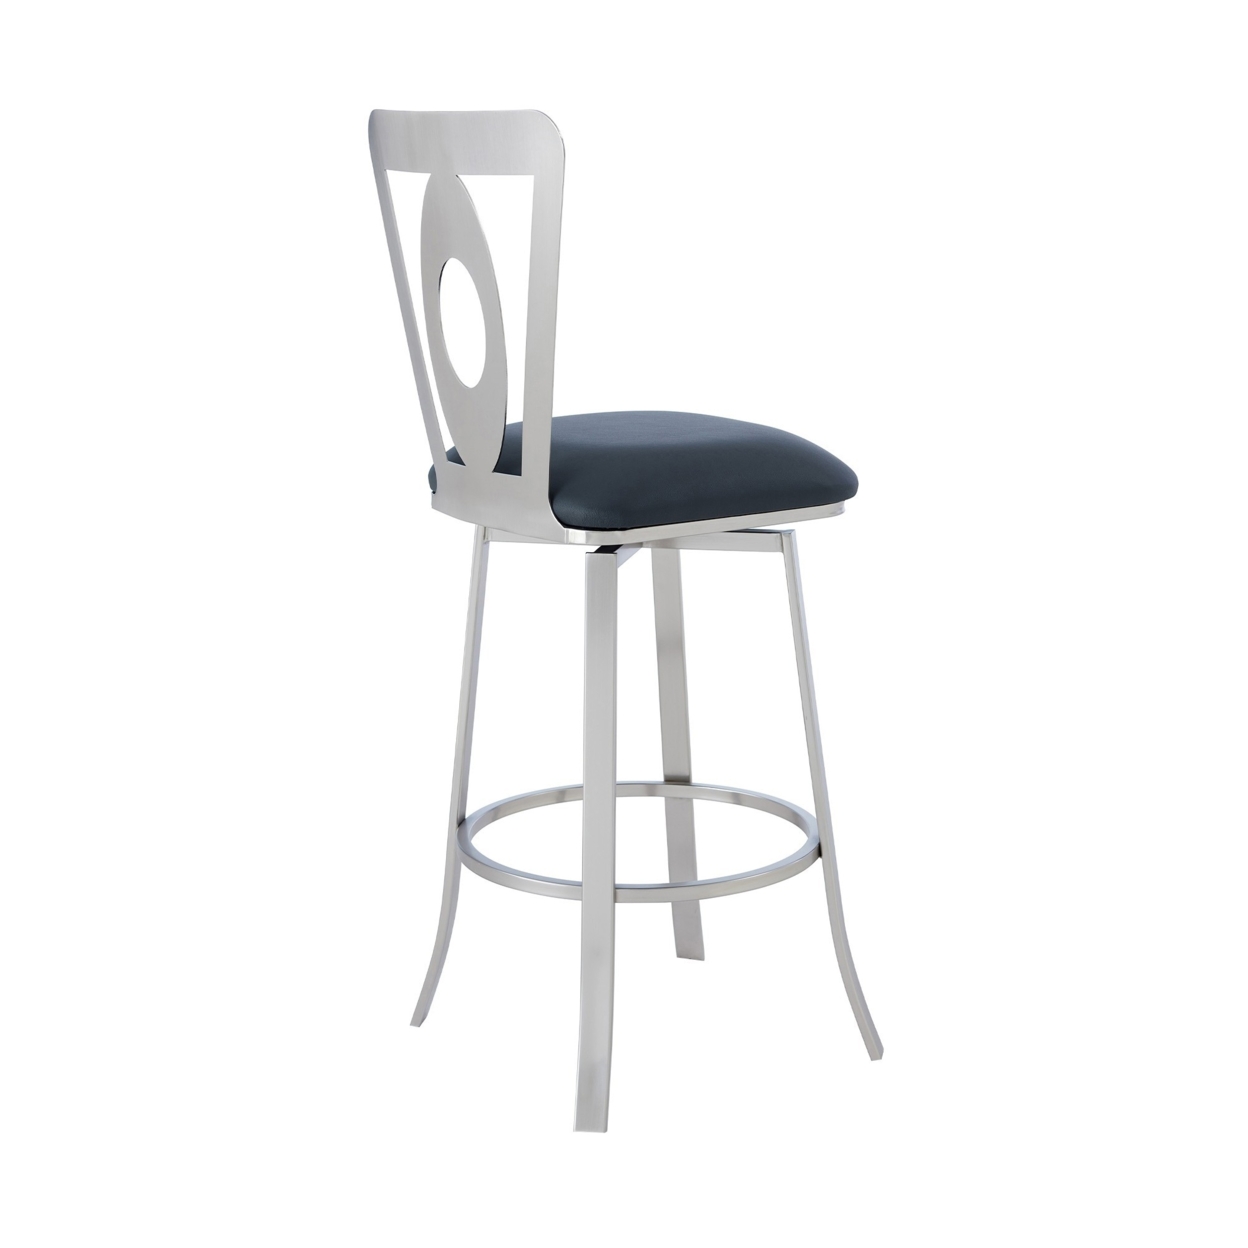 30 Inches Leatherette Barstool With Oval Cut Out, Silver- Saltoro Sherpi